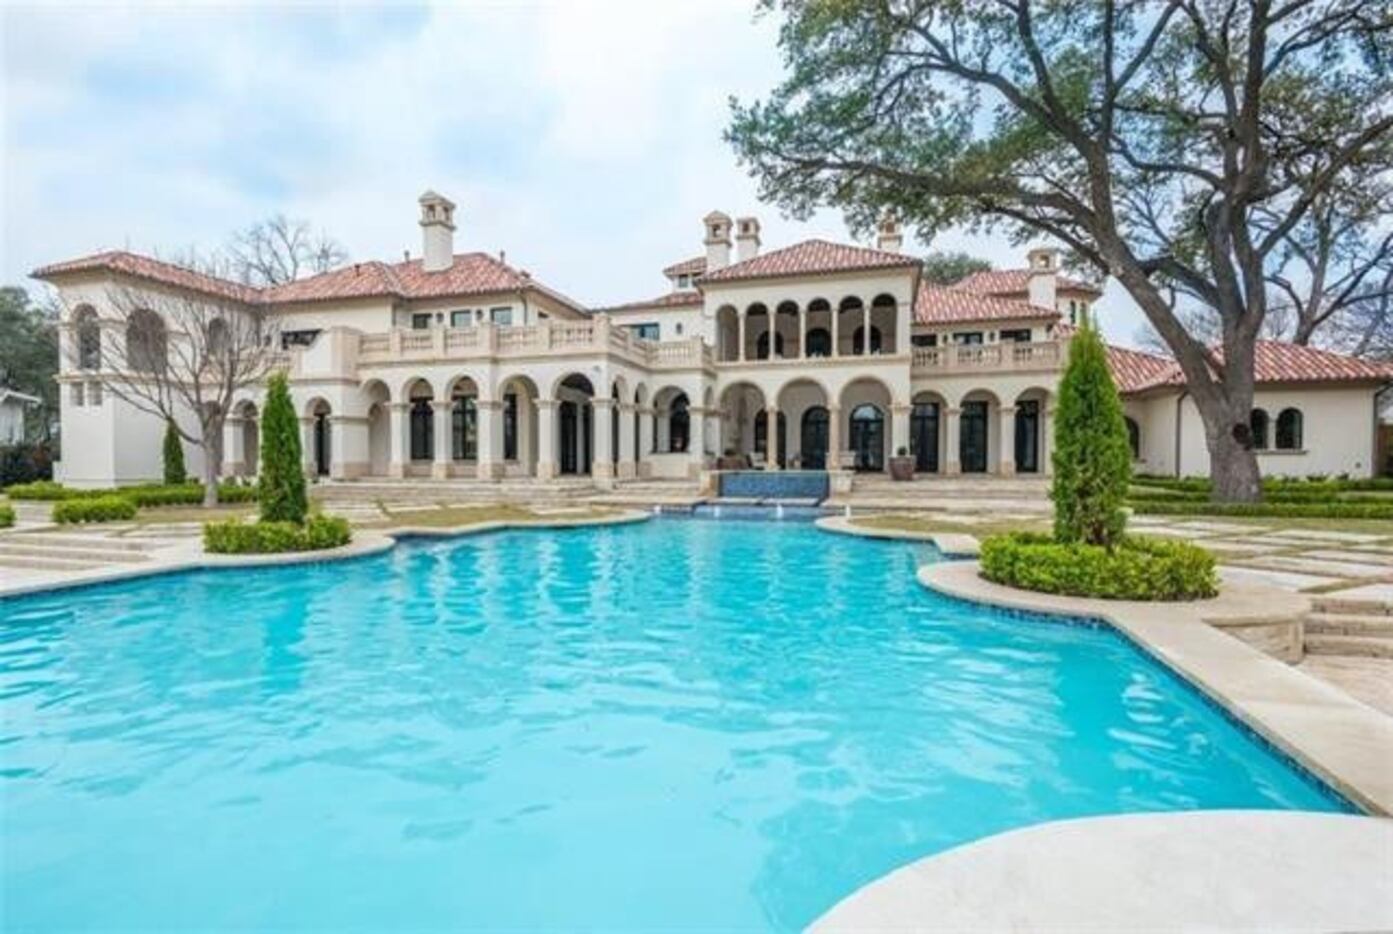 The Preston Hollow estate has 14,000 square feet and sits almost on 2 acres.